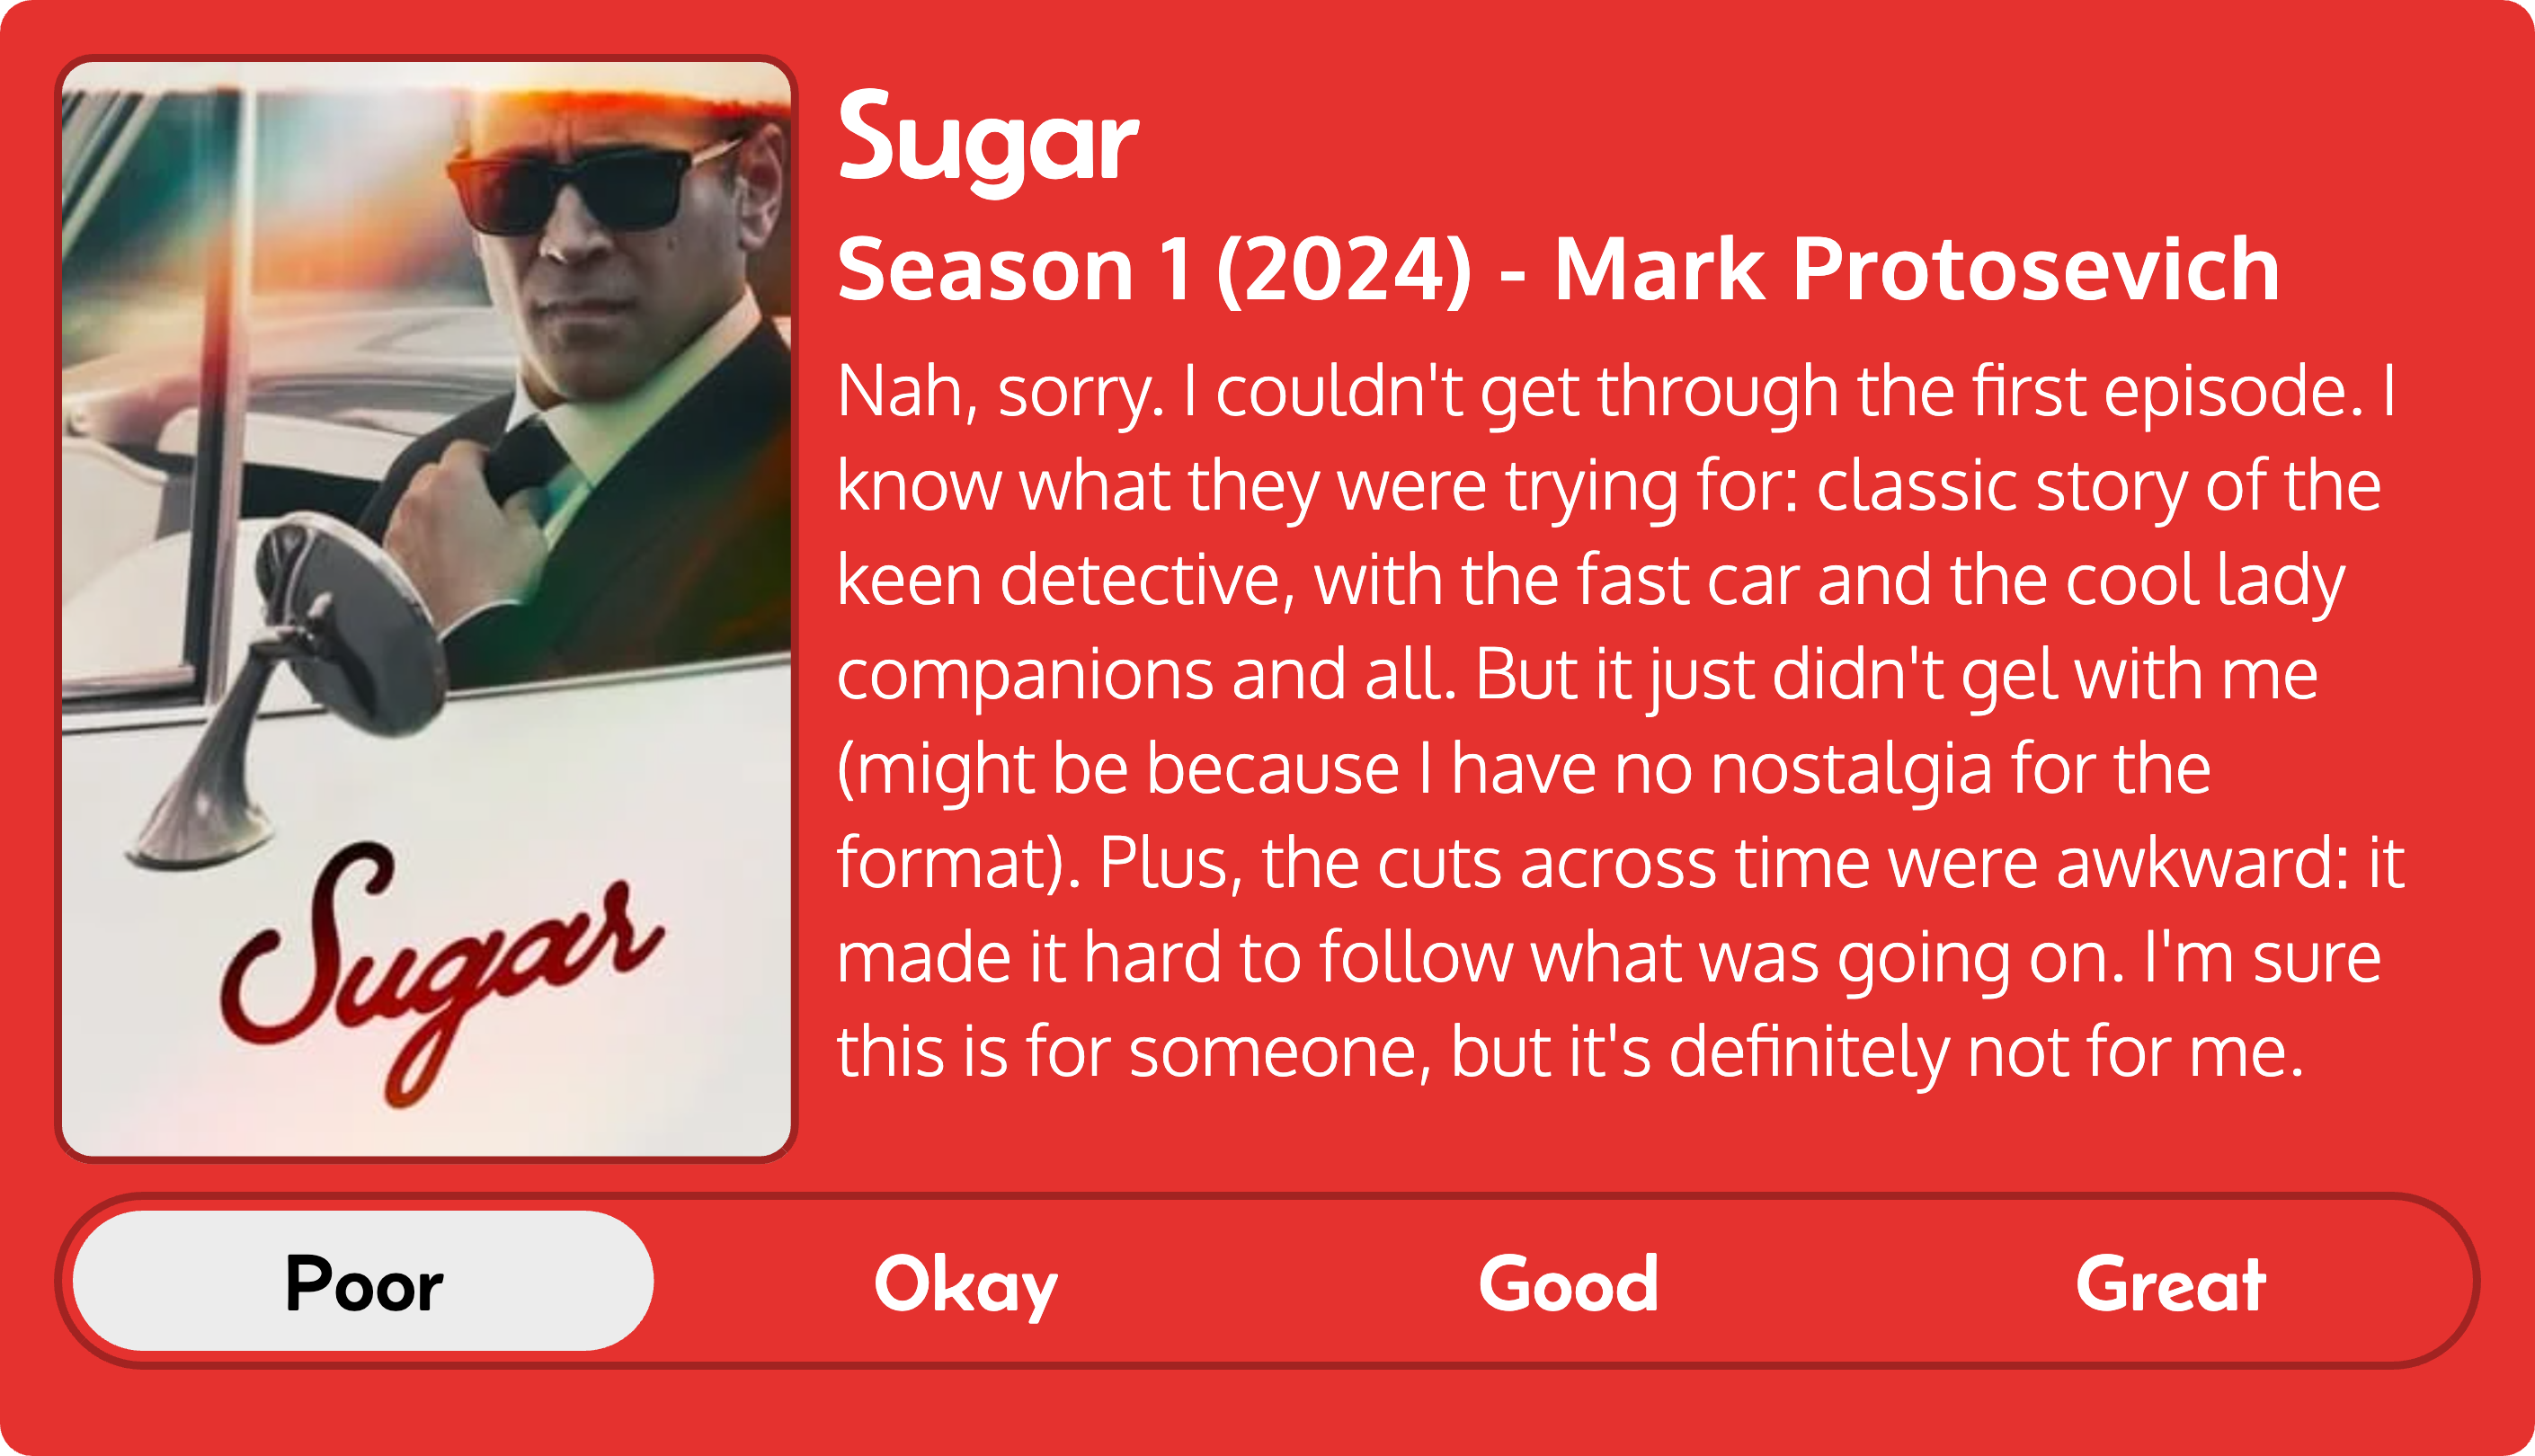 Quick review of Sugar: Season 1 (2024), by Mark Protosevich. Review reads as follows: Nah, sorry. I couldn't get through the first episode. I know what they were trying for: classic story of the keen detective, with the fast car and the cool lady companions and all. But it just didn't gel with me (might be because I have no nostalgia for the format). Plus, the cuts across time were awkward: it made it hard to follow what was going on. I'm sure this is for someone, but it's definitely not for me. Overall review: poor